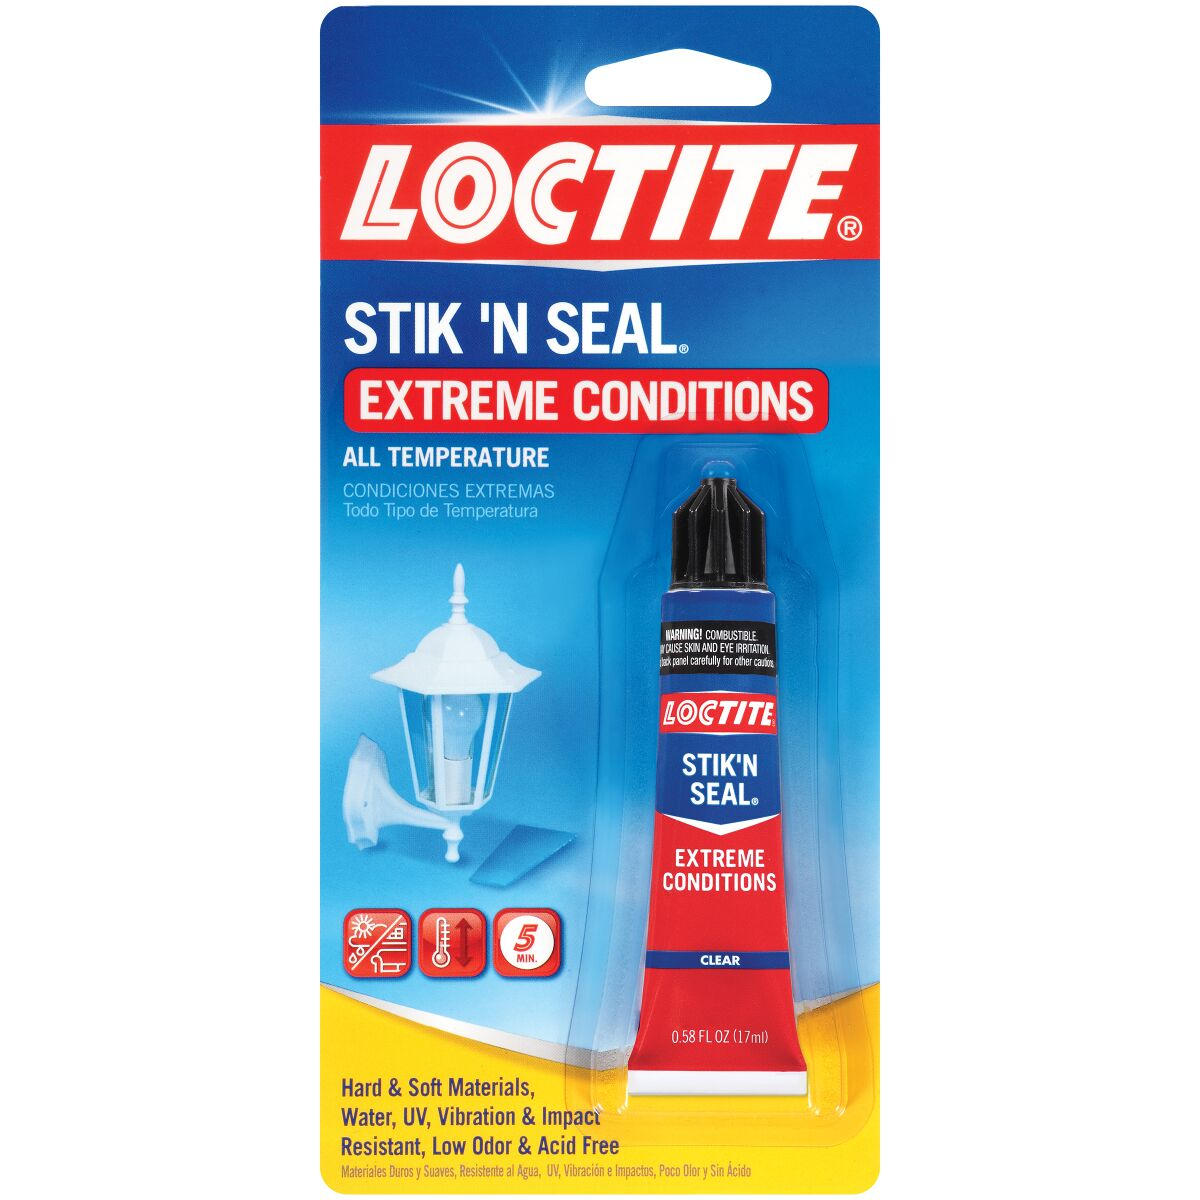 Loctite Stik 'N Seal Extreme Conditions